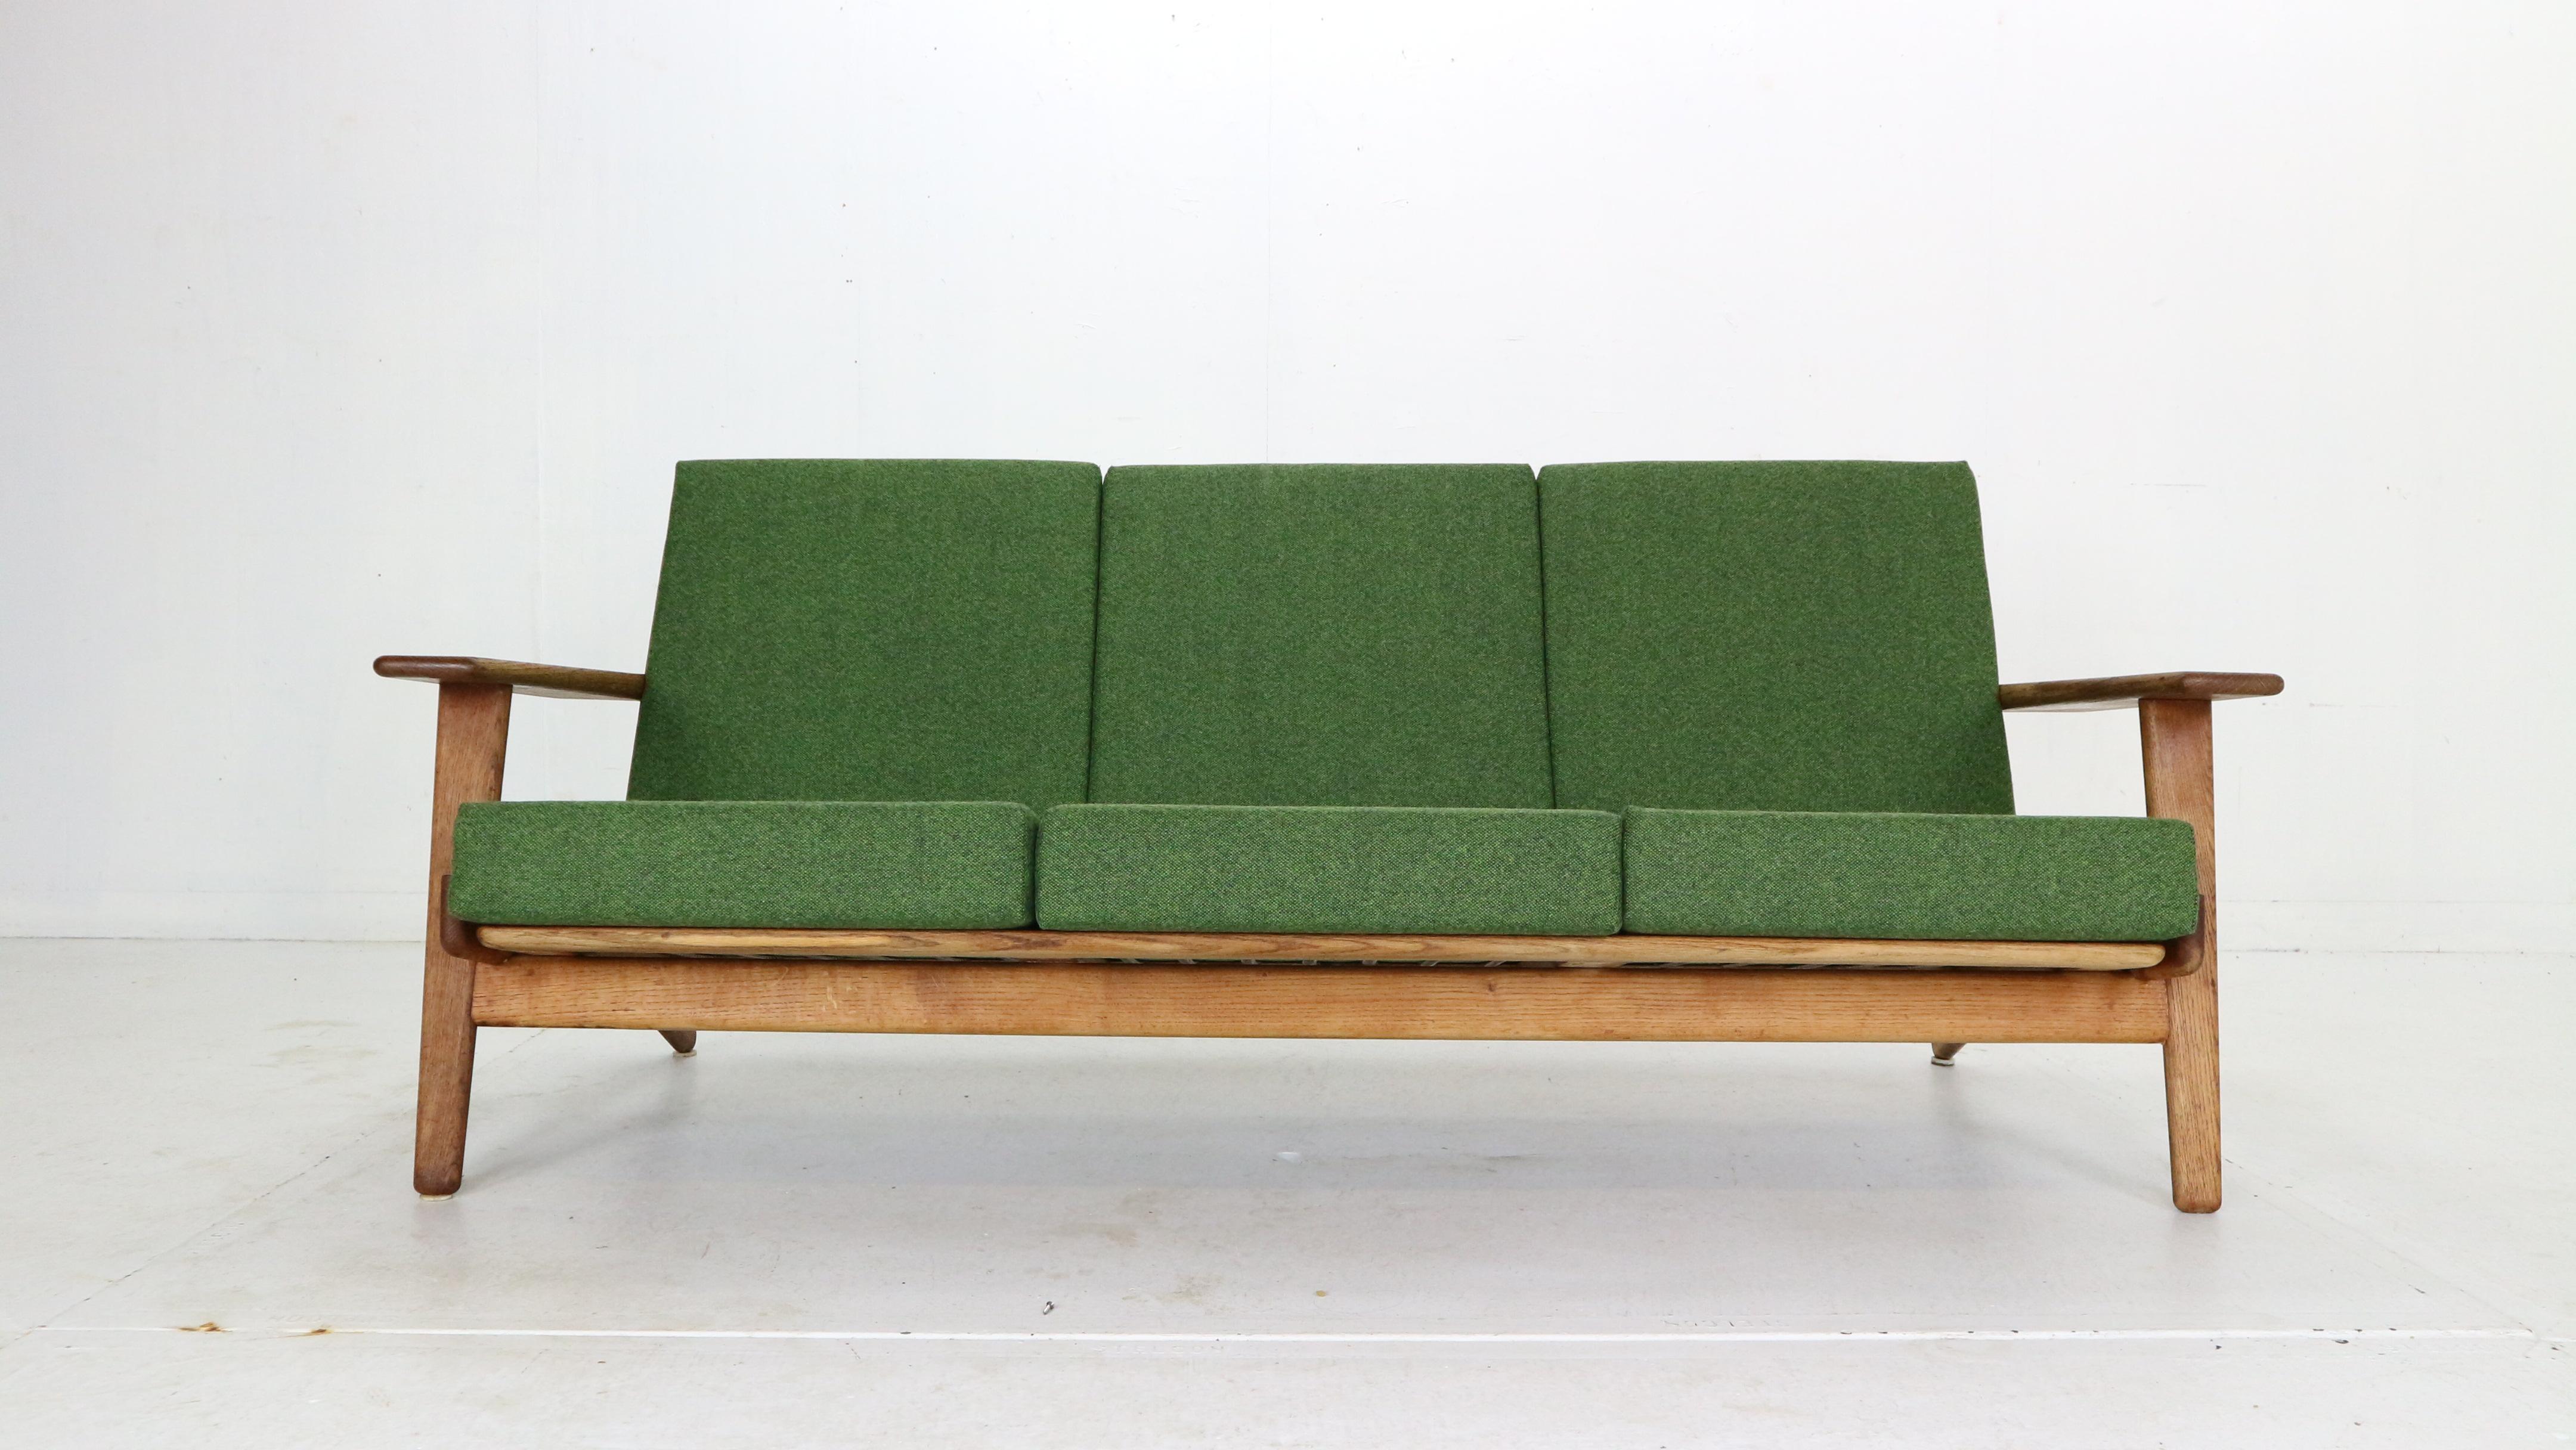 Scandinavian Modern period 3- seater sofa designed by Hans J. Wegner and manufactured by GETAMA in 1960's period, Denmark.

Solid oak sofa with elegant curving details and strong wide armrests, high backrests creates the most comfortable and